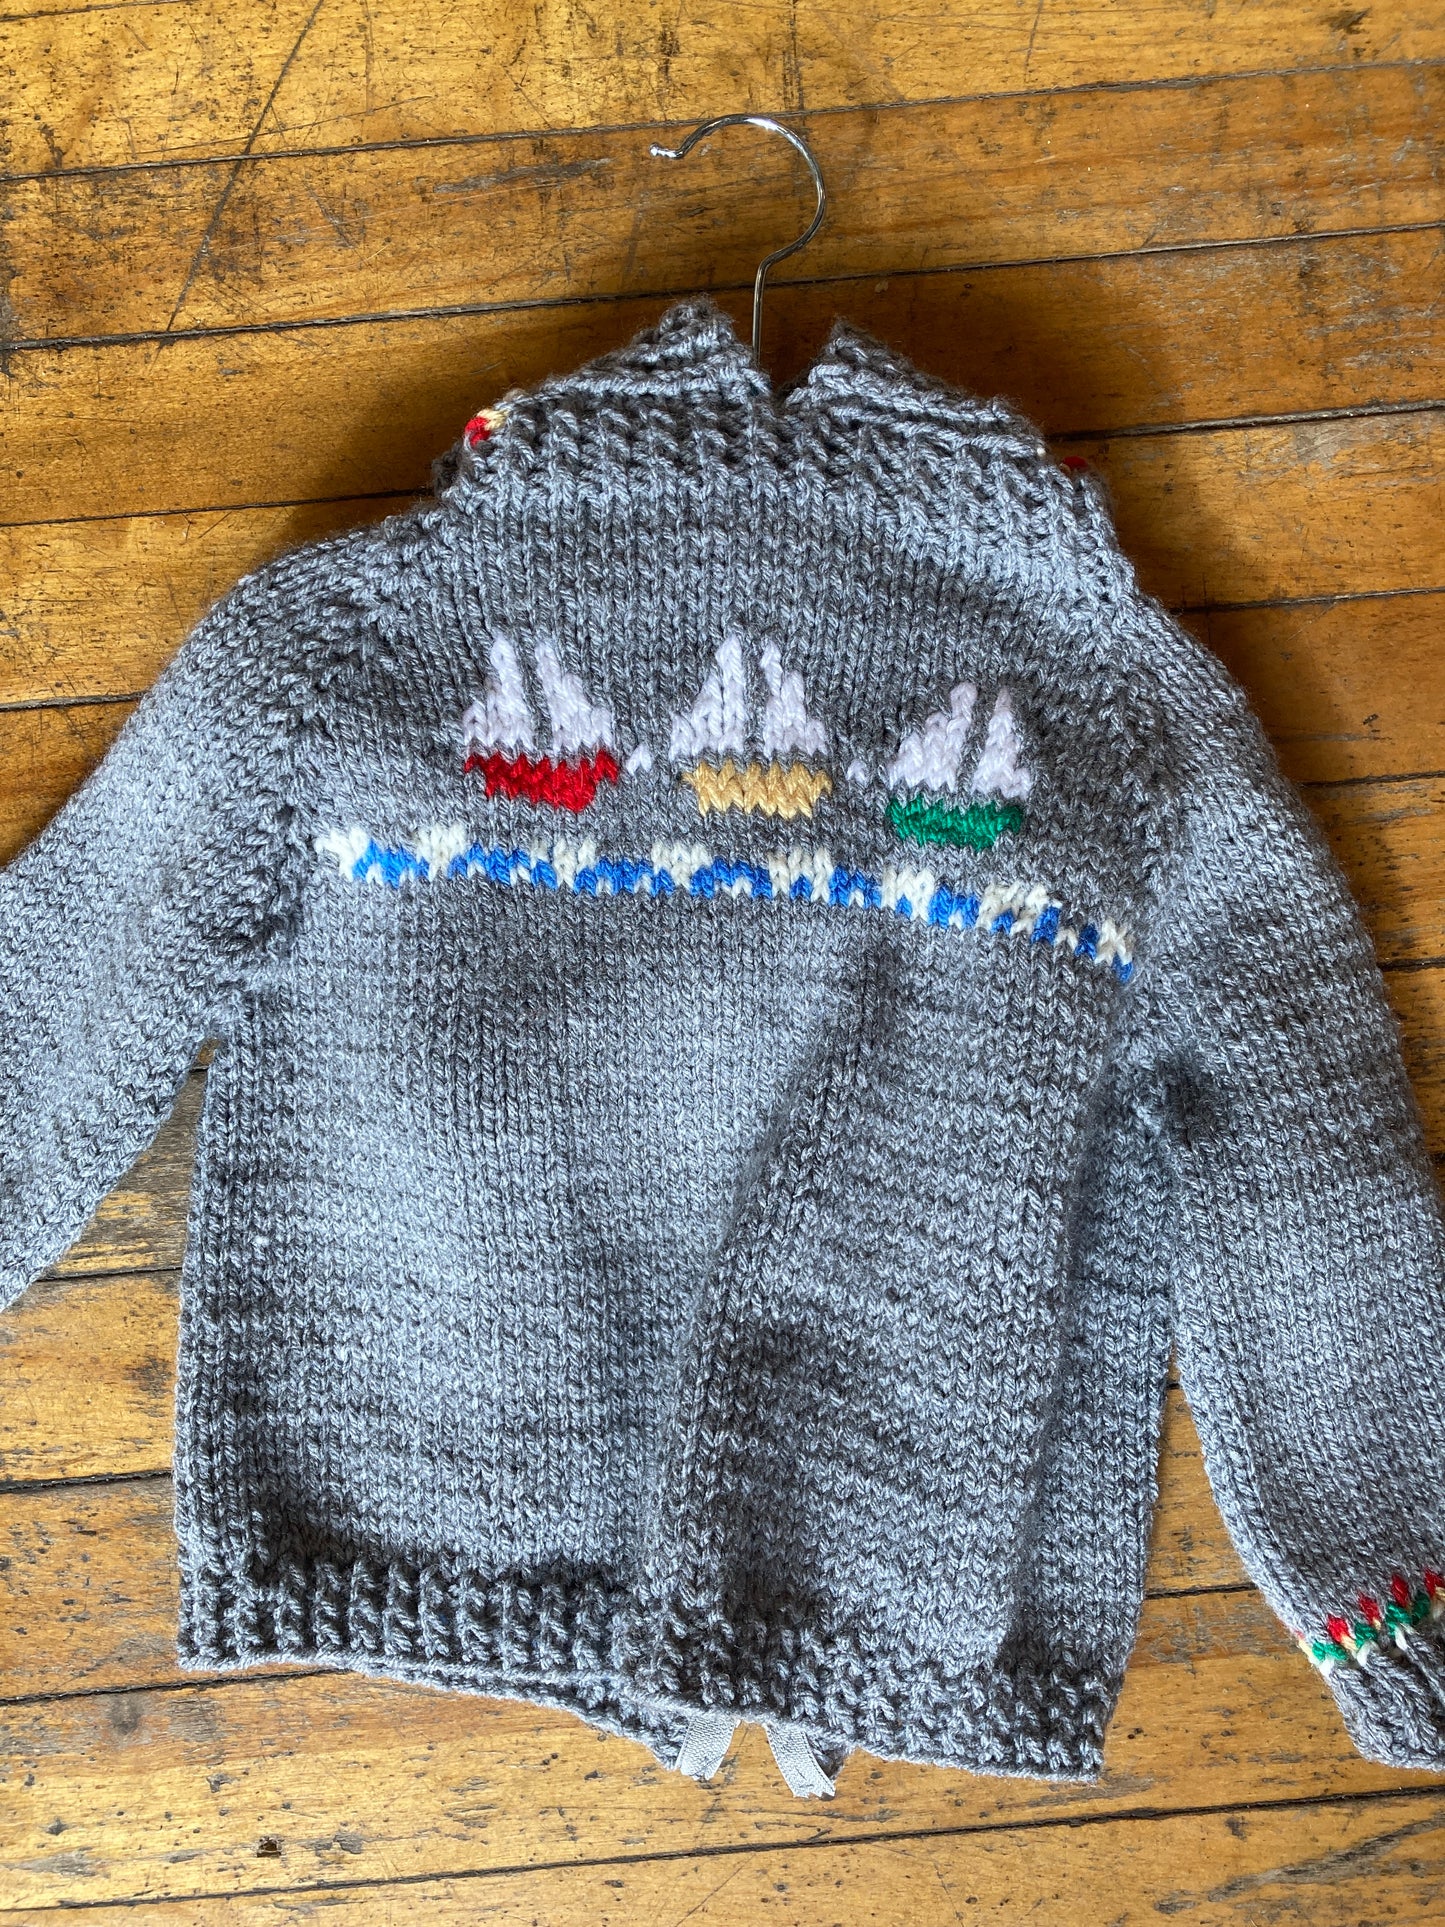 Hand knit baby sweaters